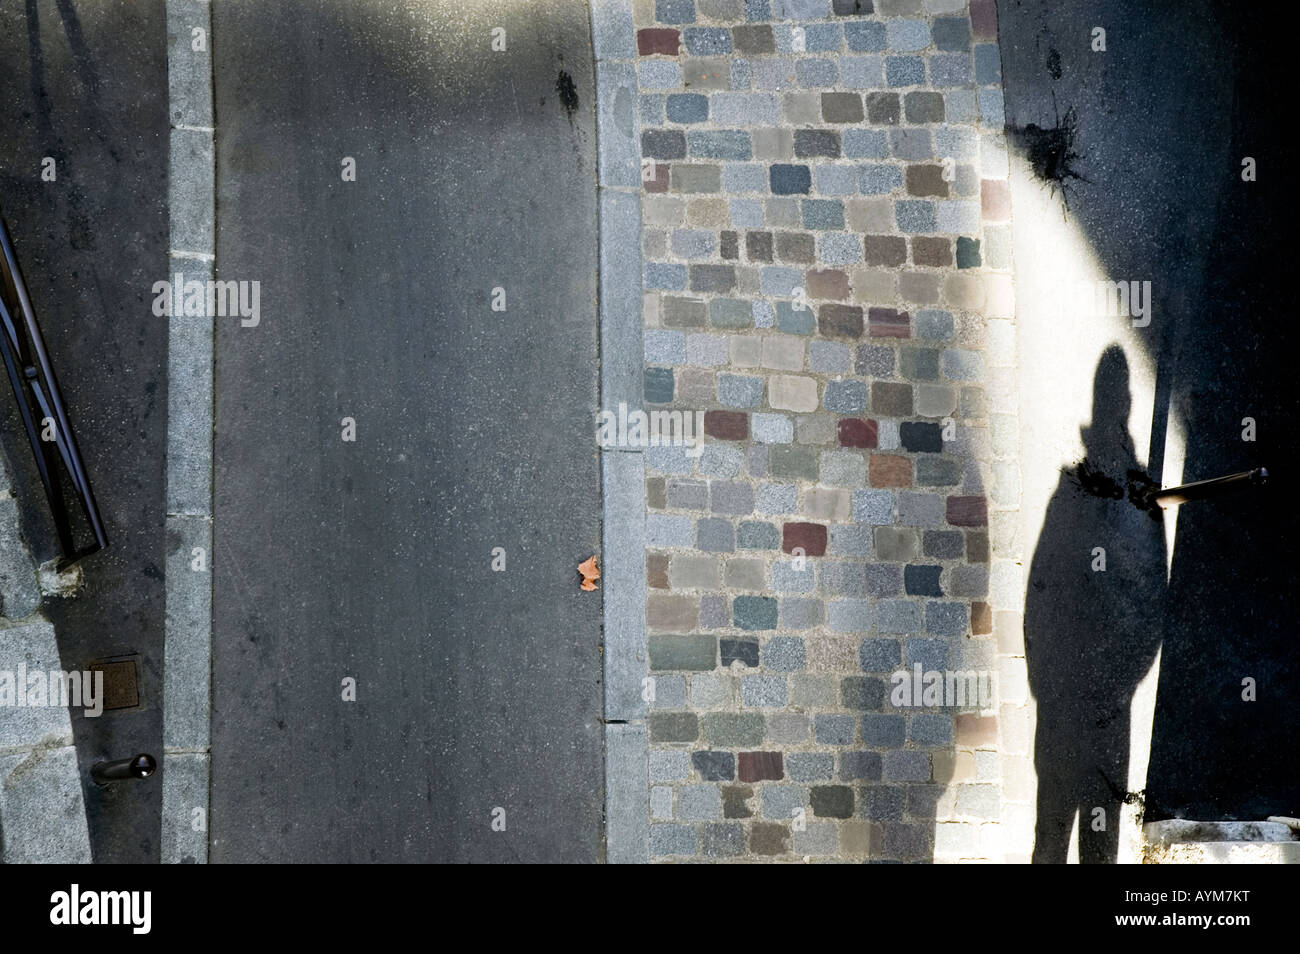 Shadow of a man on a cobblestone street with sinister overtones. Stock Photo